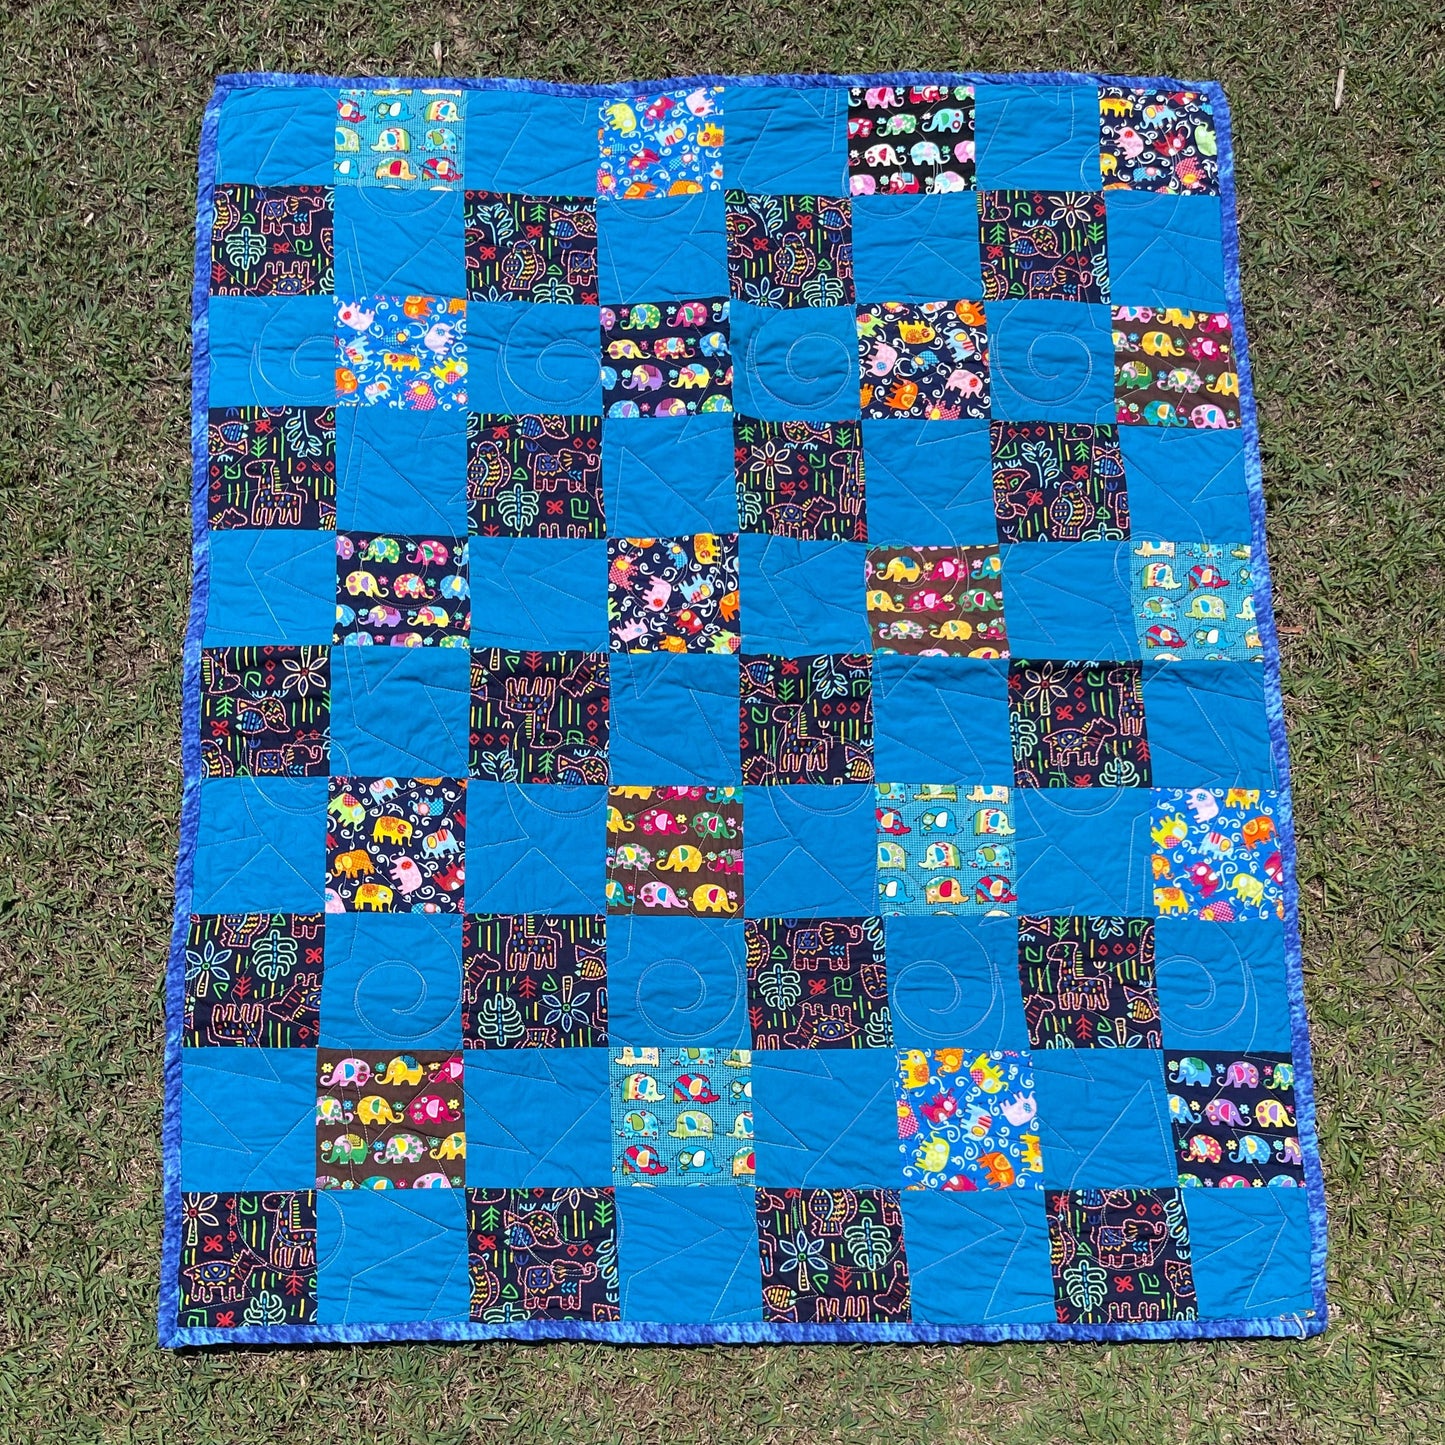 Stepping Stones Quilt Finished Size 34.5" x 42.5" Approx